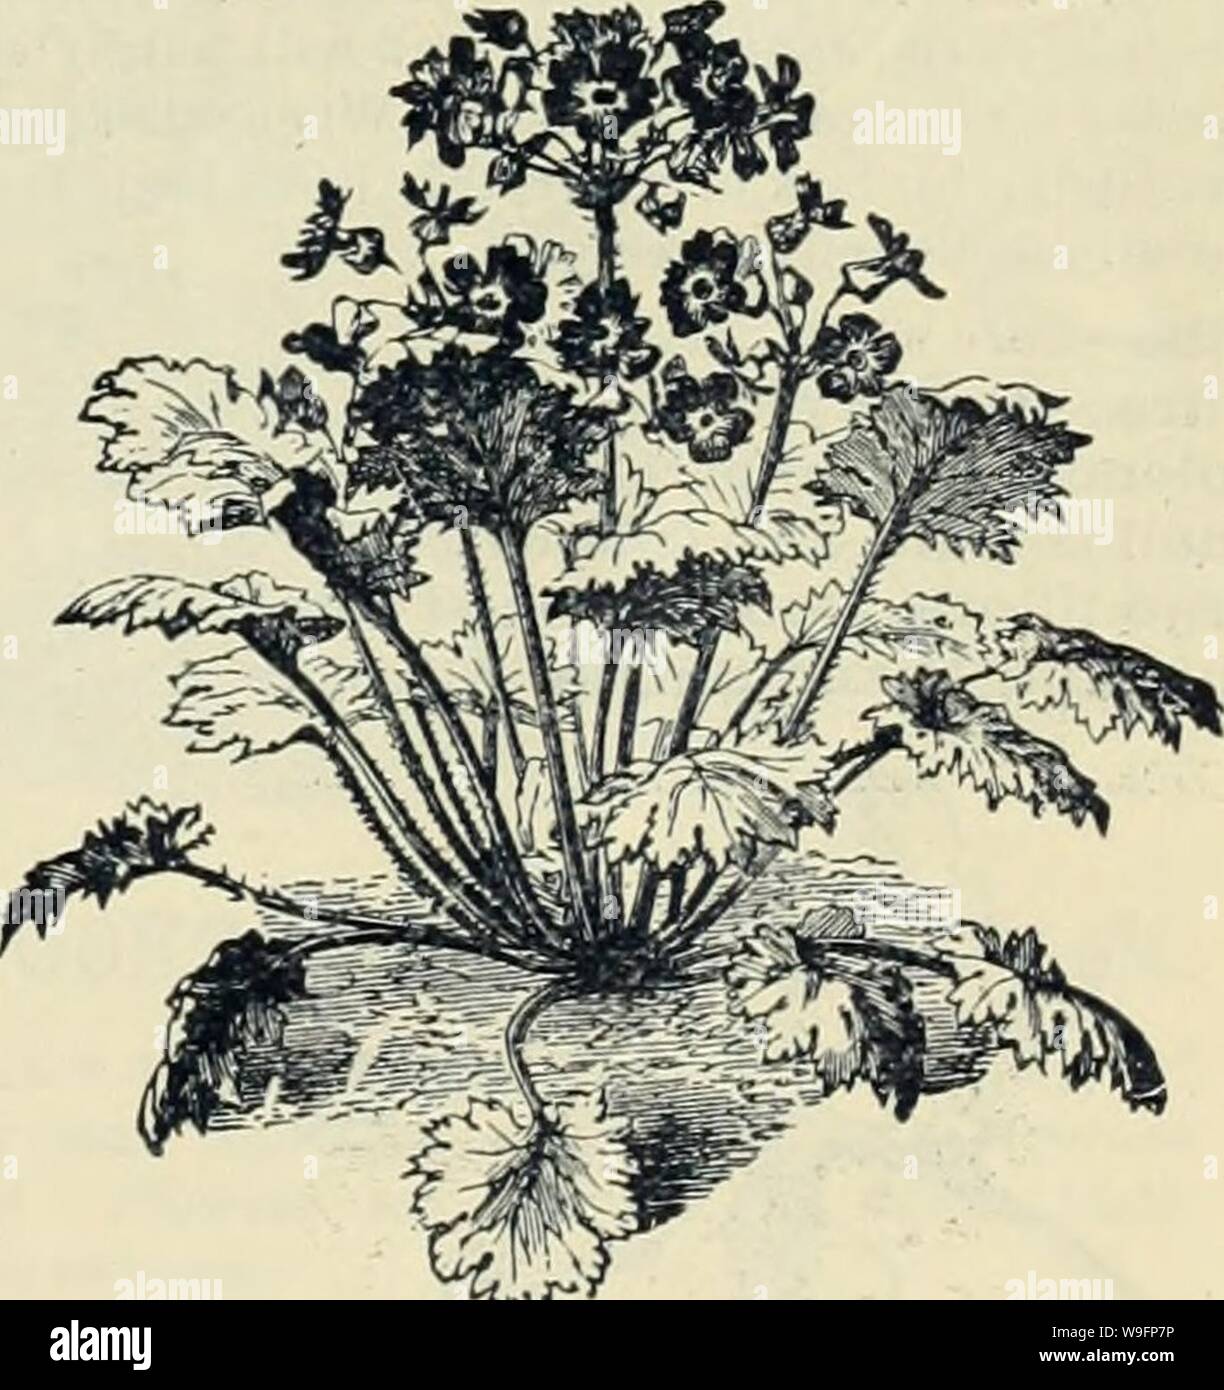 Archive image from page 60 of Currie Bros' horticultural guide . Currie Bros.' horticultural guide : spring 1888  curriebroshortic1888curr Year: 1888 ( PHLOX DRUMMONDII. One of the showiest annuals, valuable for the pro- fusion and duration of its flowers. Hardy annuals. Alba—Pure white 5 (Jardinal—Brilliant scarlet 5 Cuspldata Purple—(For description see Novel- ties) 25 Cuspidata Violet Blue—(For description see Novelties 1 35 General Grant—Rich bright purple 5 Isabellina—Yellow 5 Leopoldii—Splendid deep pink, with white eye... 5 Marmorata.—Violet, marbled white 5 PRIMULA-Chinese Primrose. Of Stock Photo